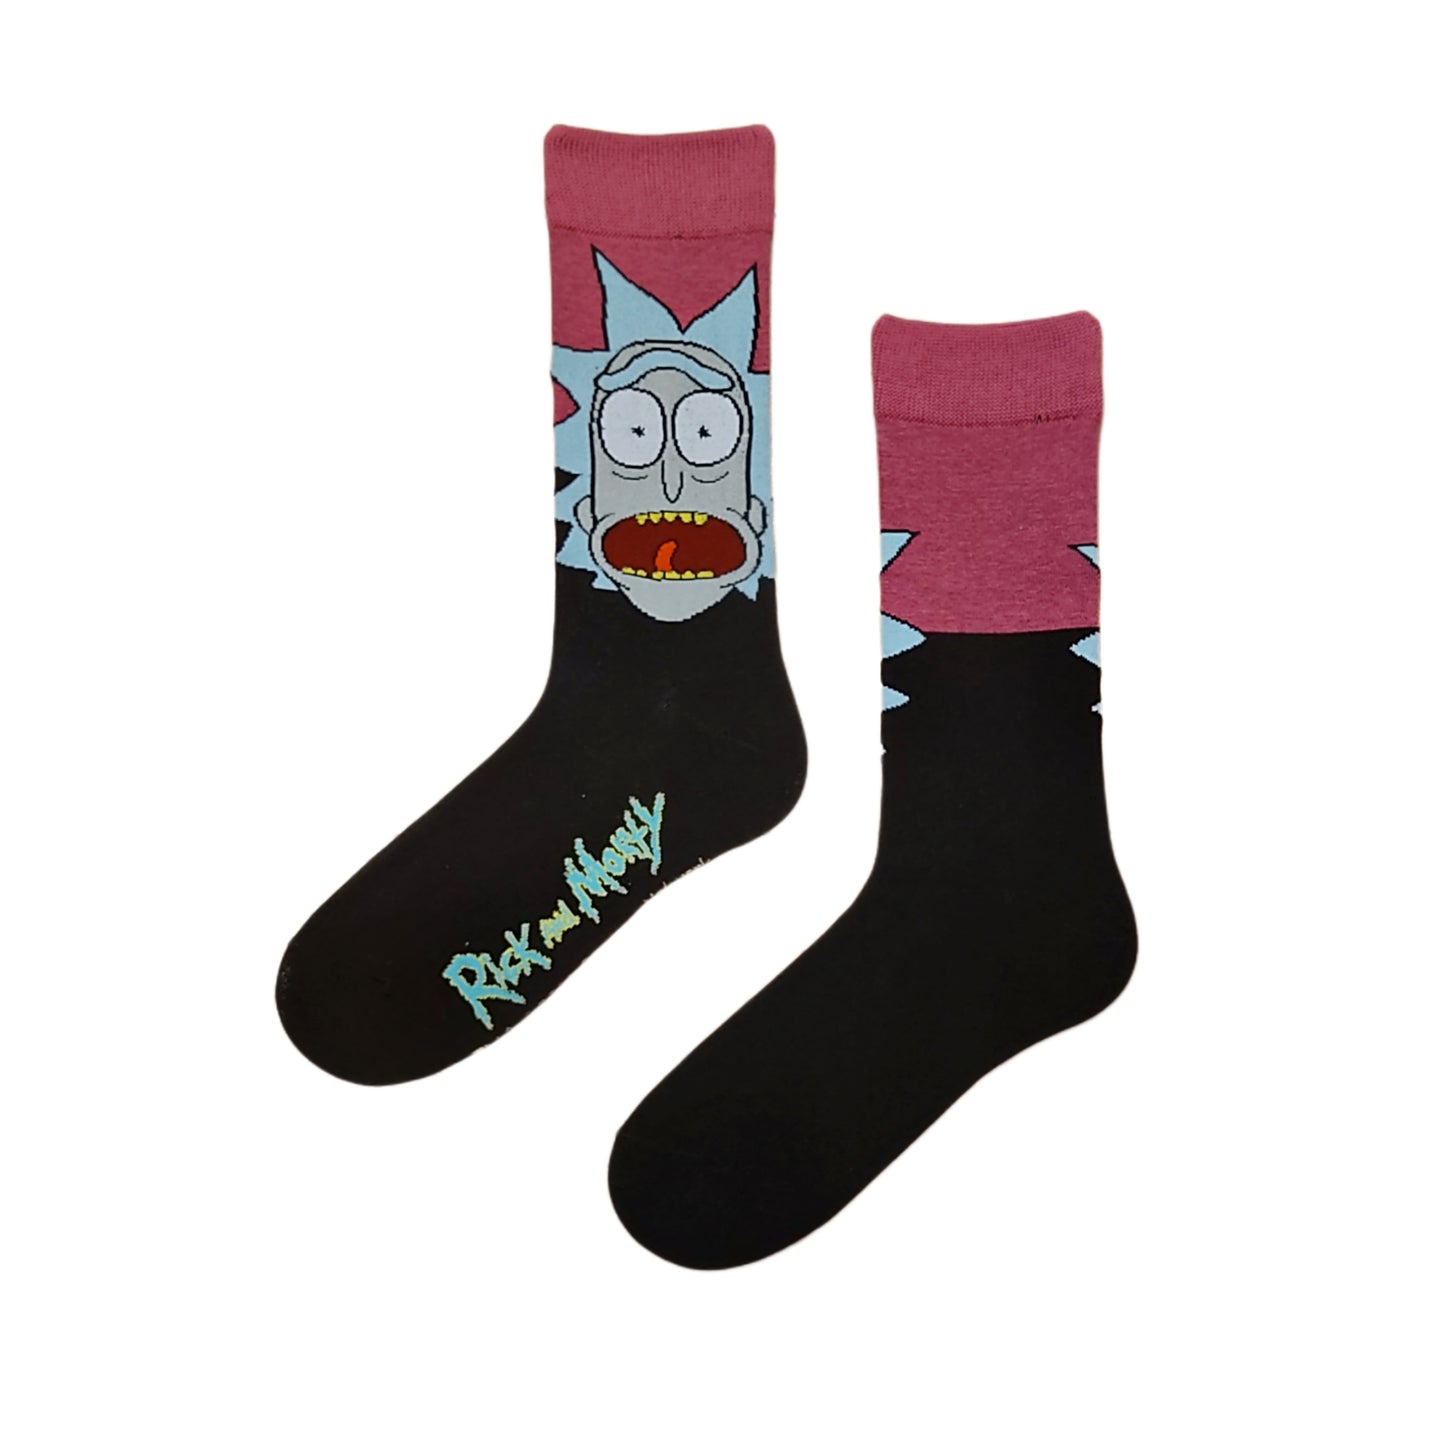 Large Faced Rick - Rick & Morty Collection - Socks